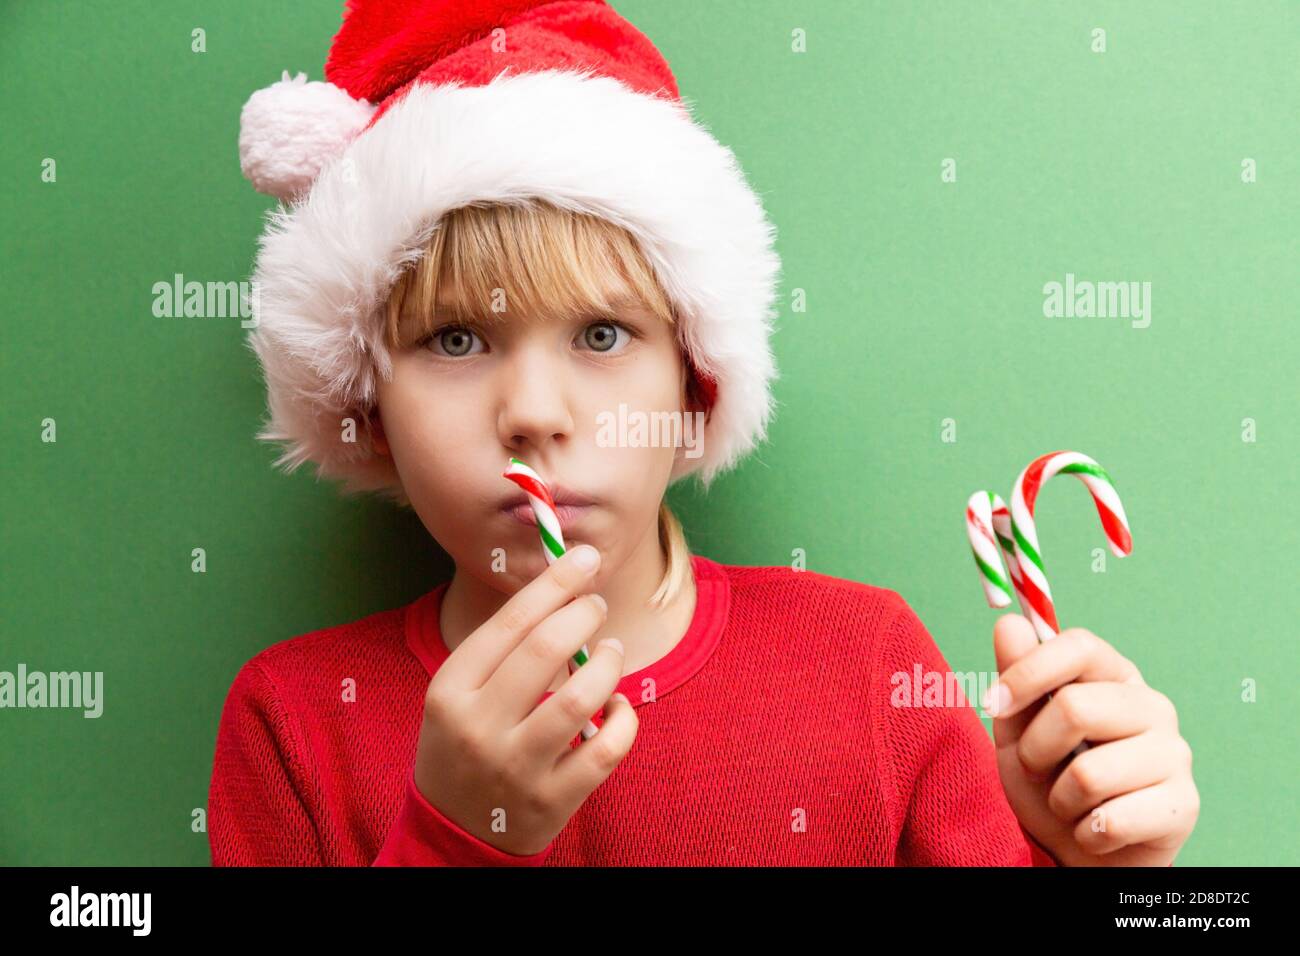 Boy in Santa Claus hat and a red jacket, eating candy canes on a green background. Christmas concept Stock Photo